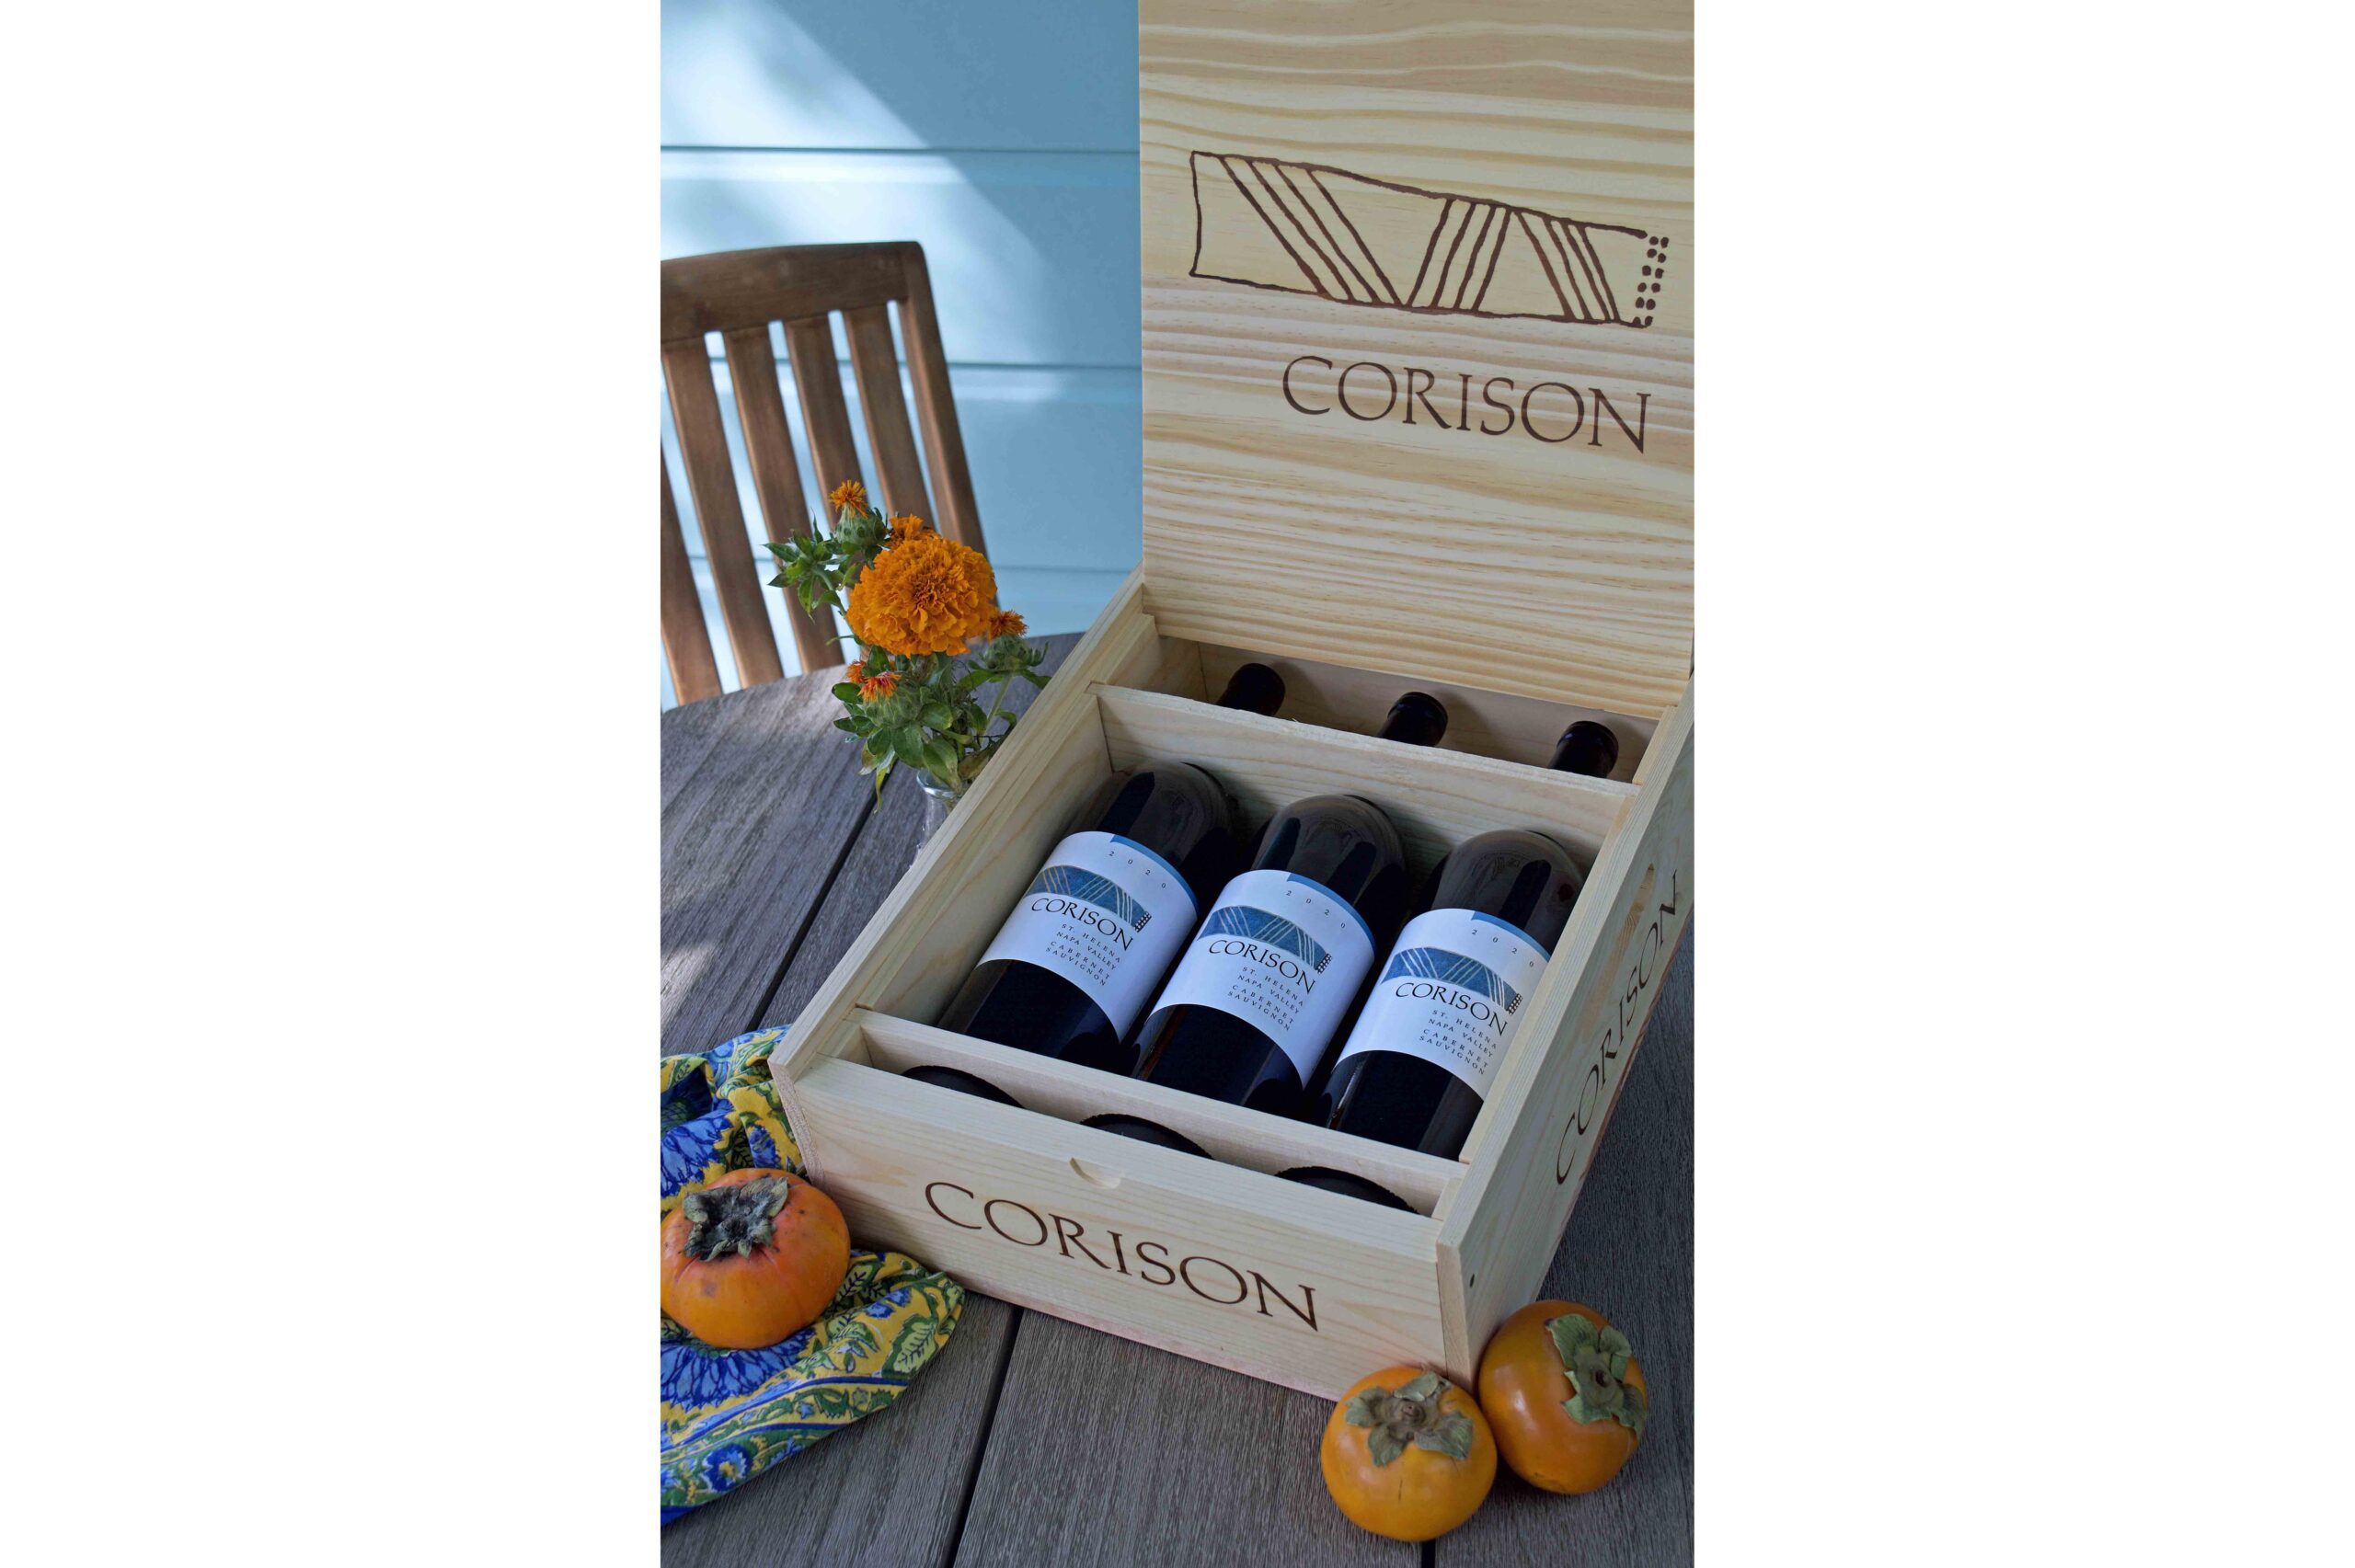 Three bottles of the 2020 Corison Napa Valley Cabernet Sauvignon on a fall holiday table